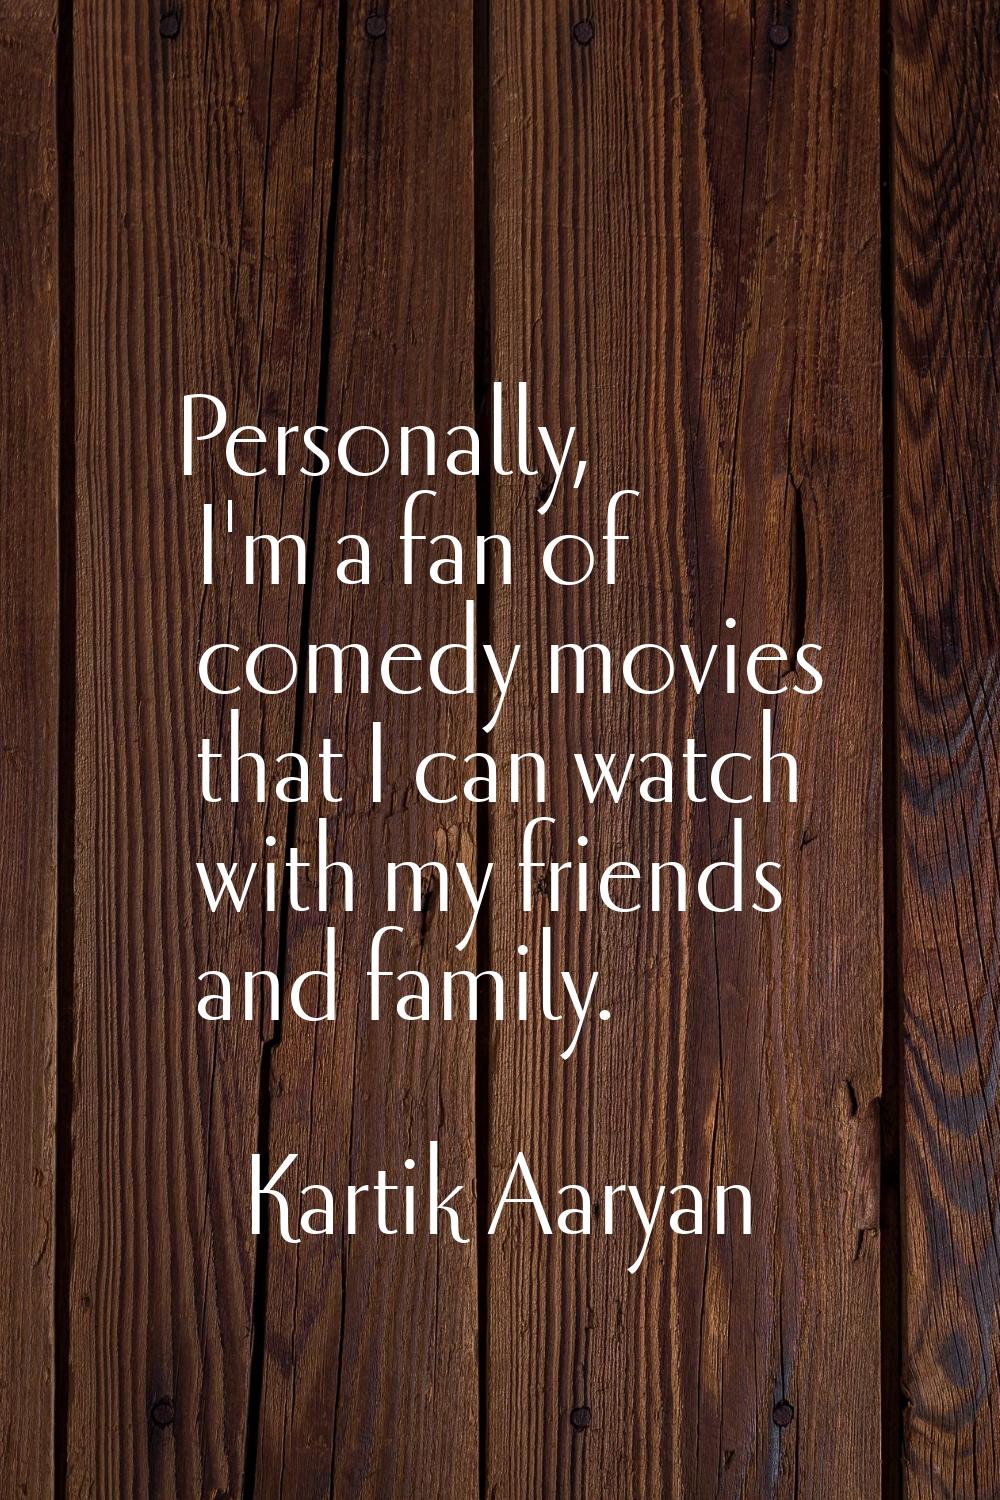 Personally, I'm a fan of comedy movies that I can watch with my friends and family.